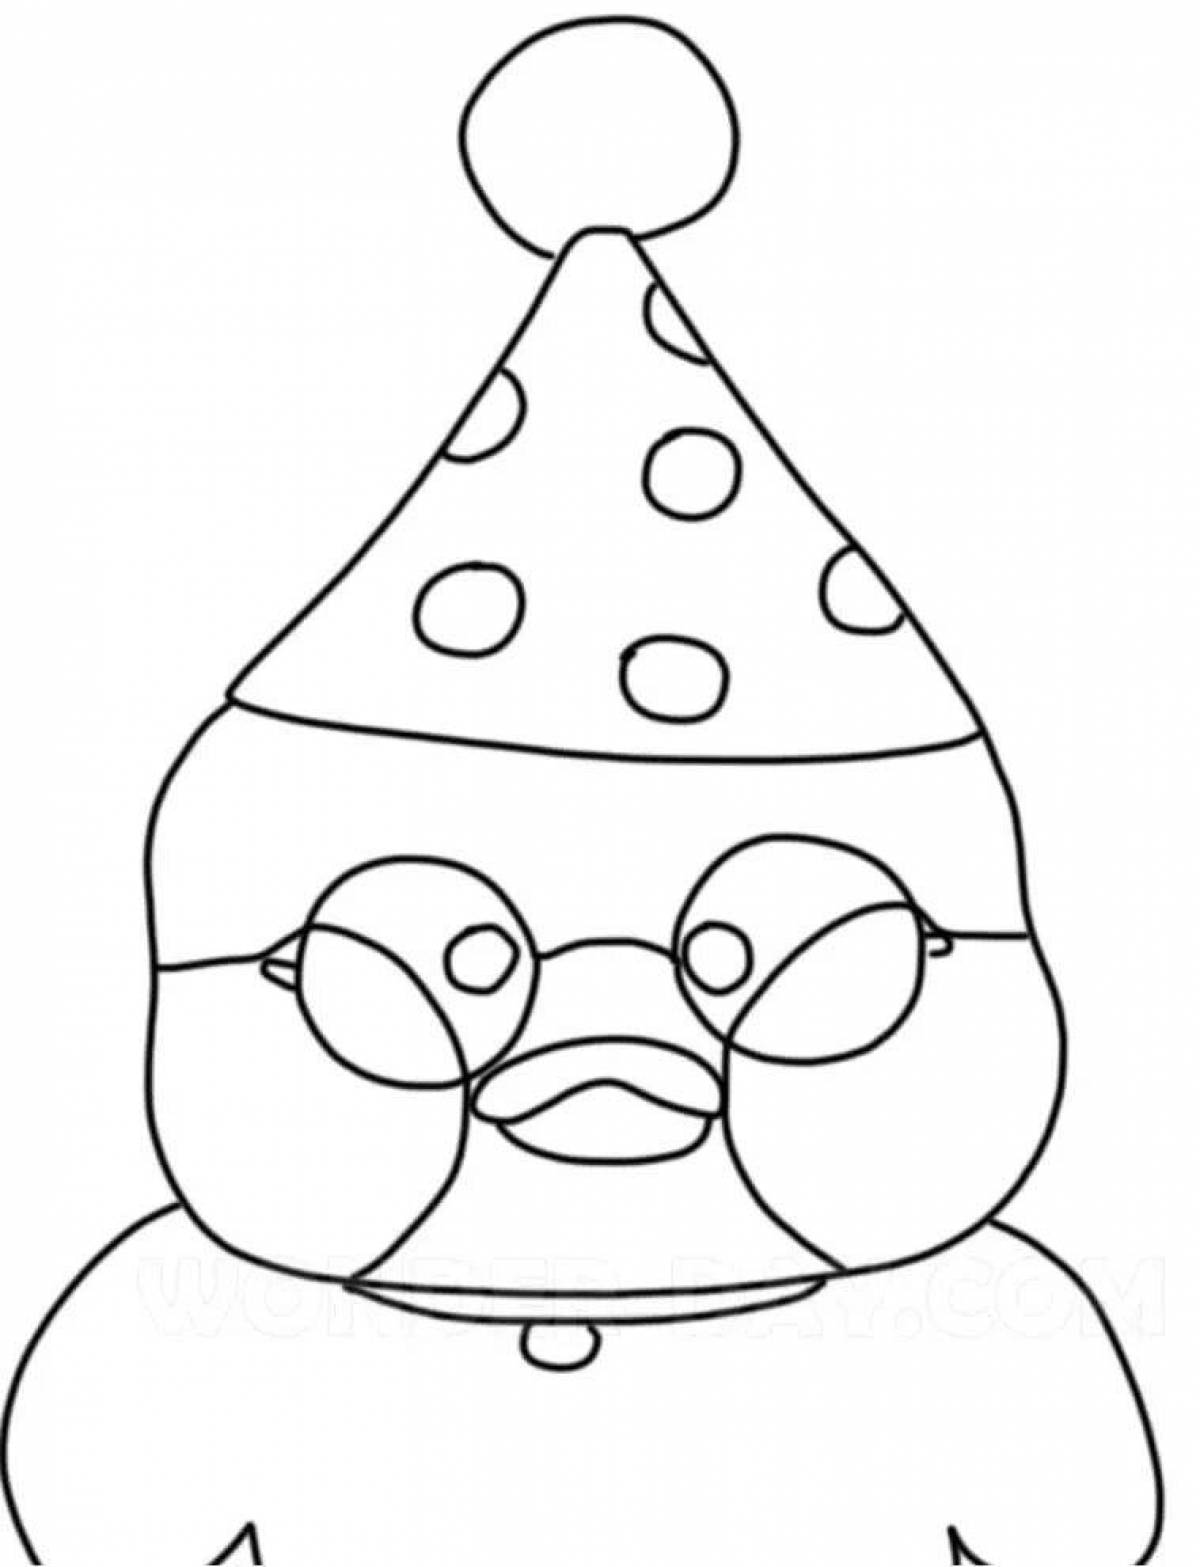 Lalafan happy duck coloring page